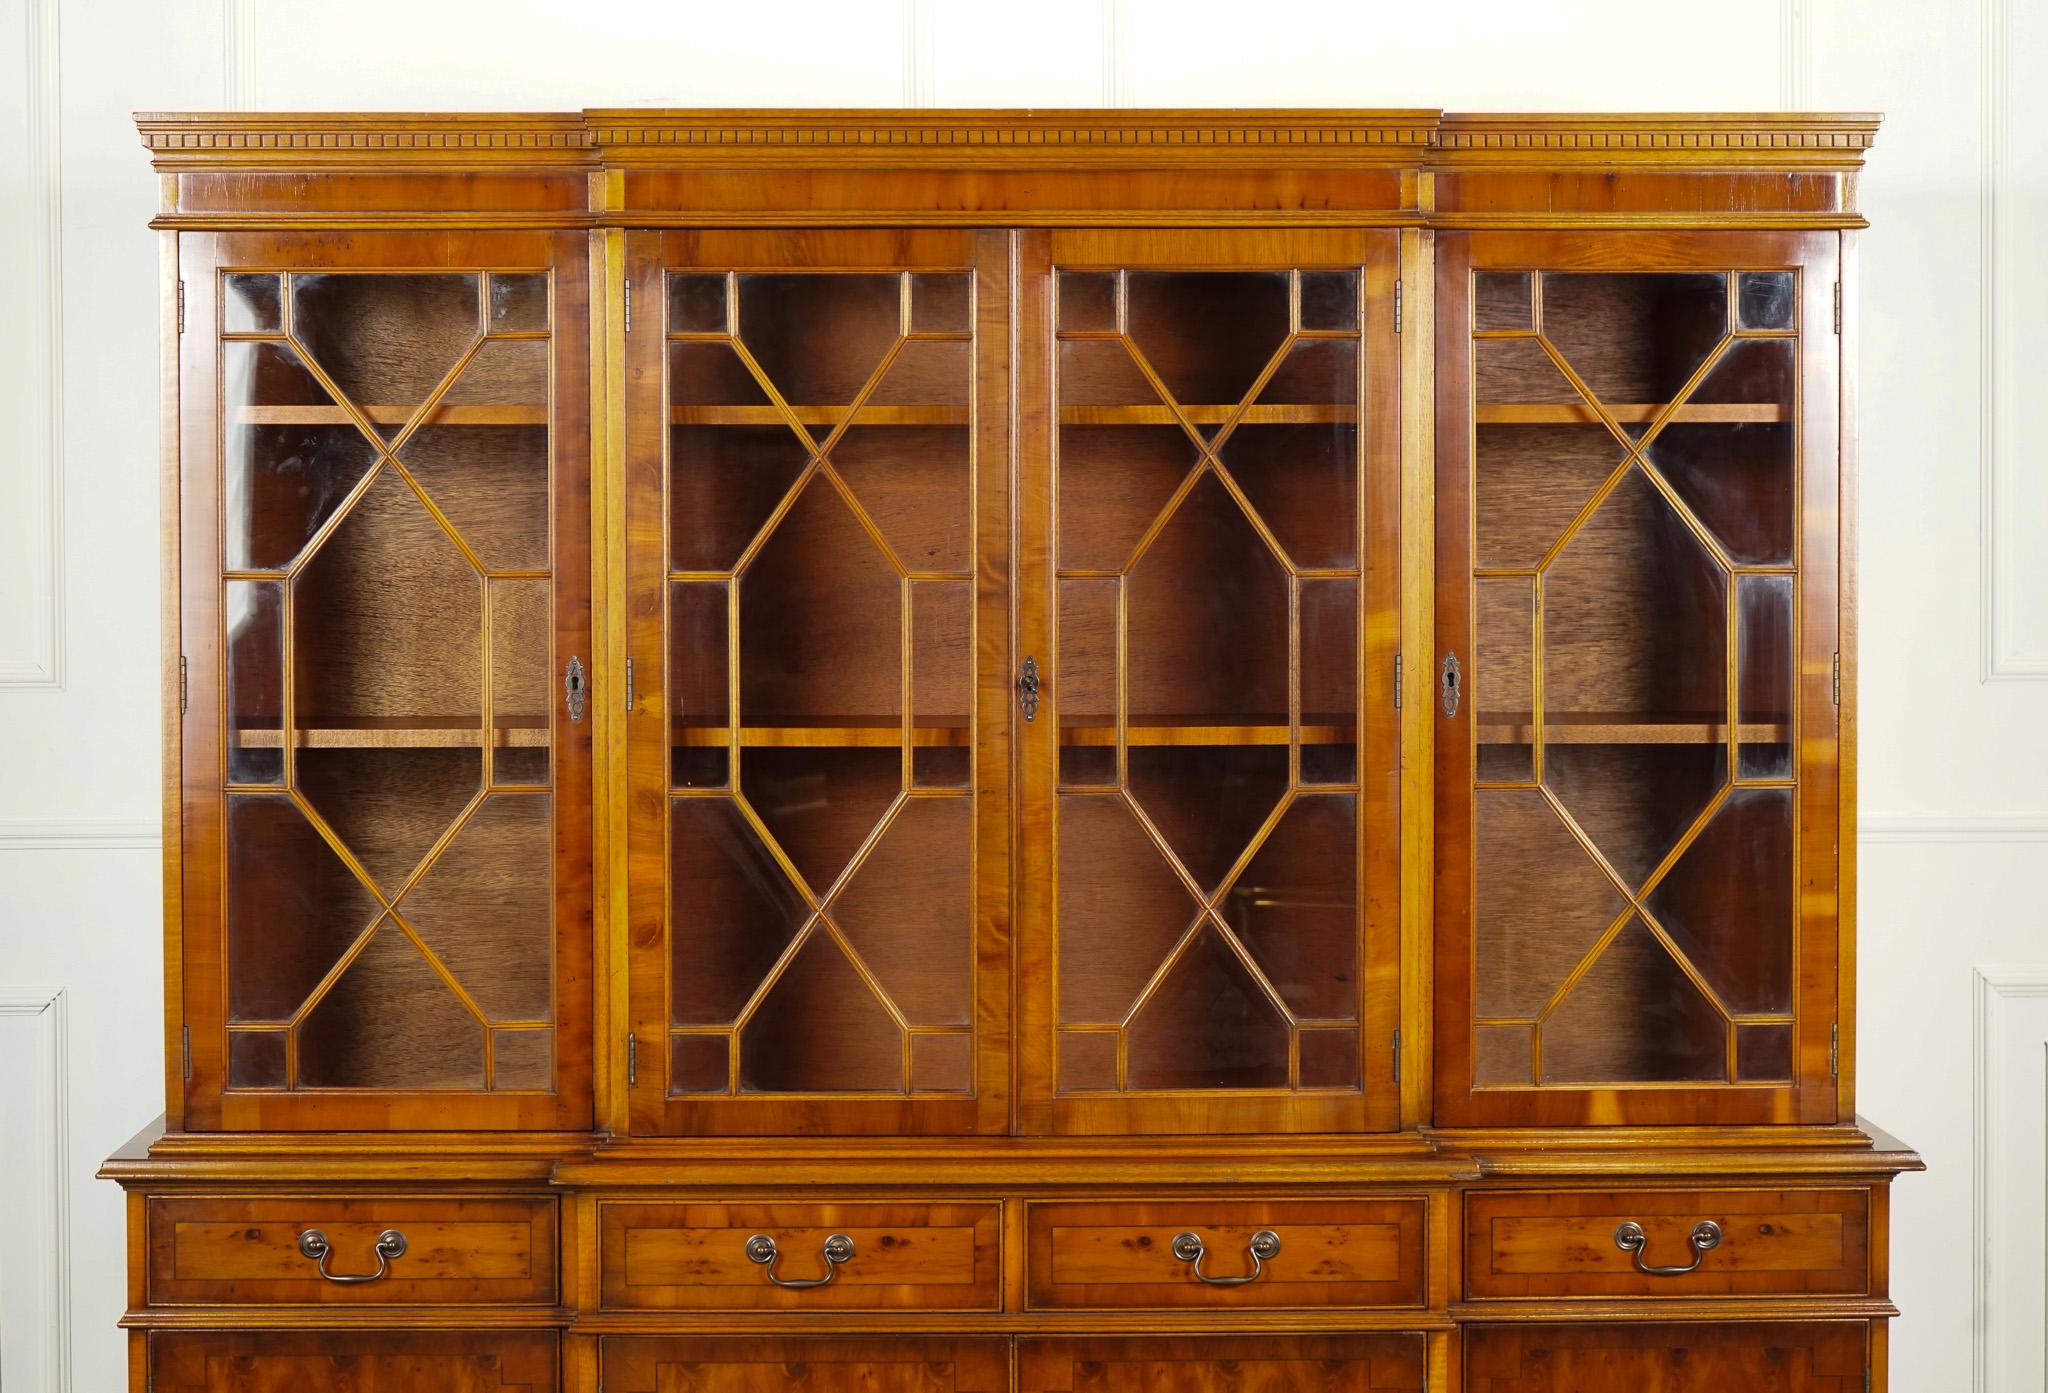 Fait main STUNNING VINTAGE BURR YEW WOOD DISPLAY CABiNET BOOKCASE BY CHARLES BARR J1 en vente